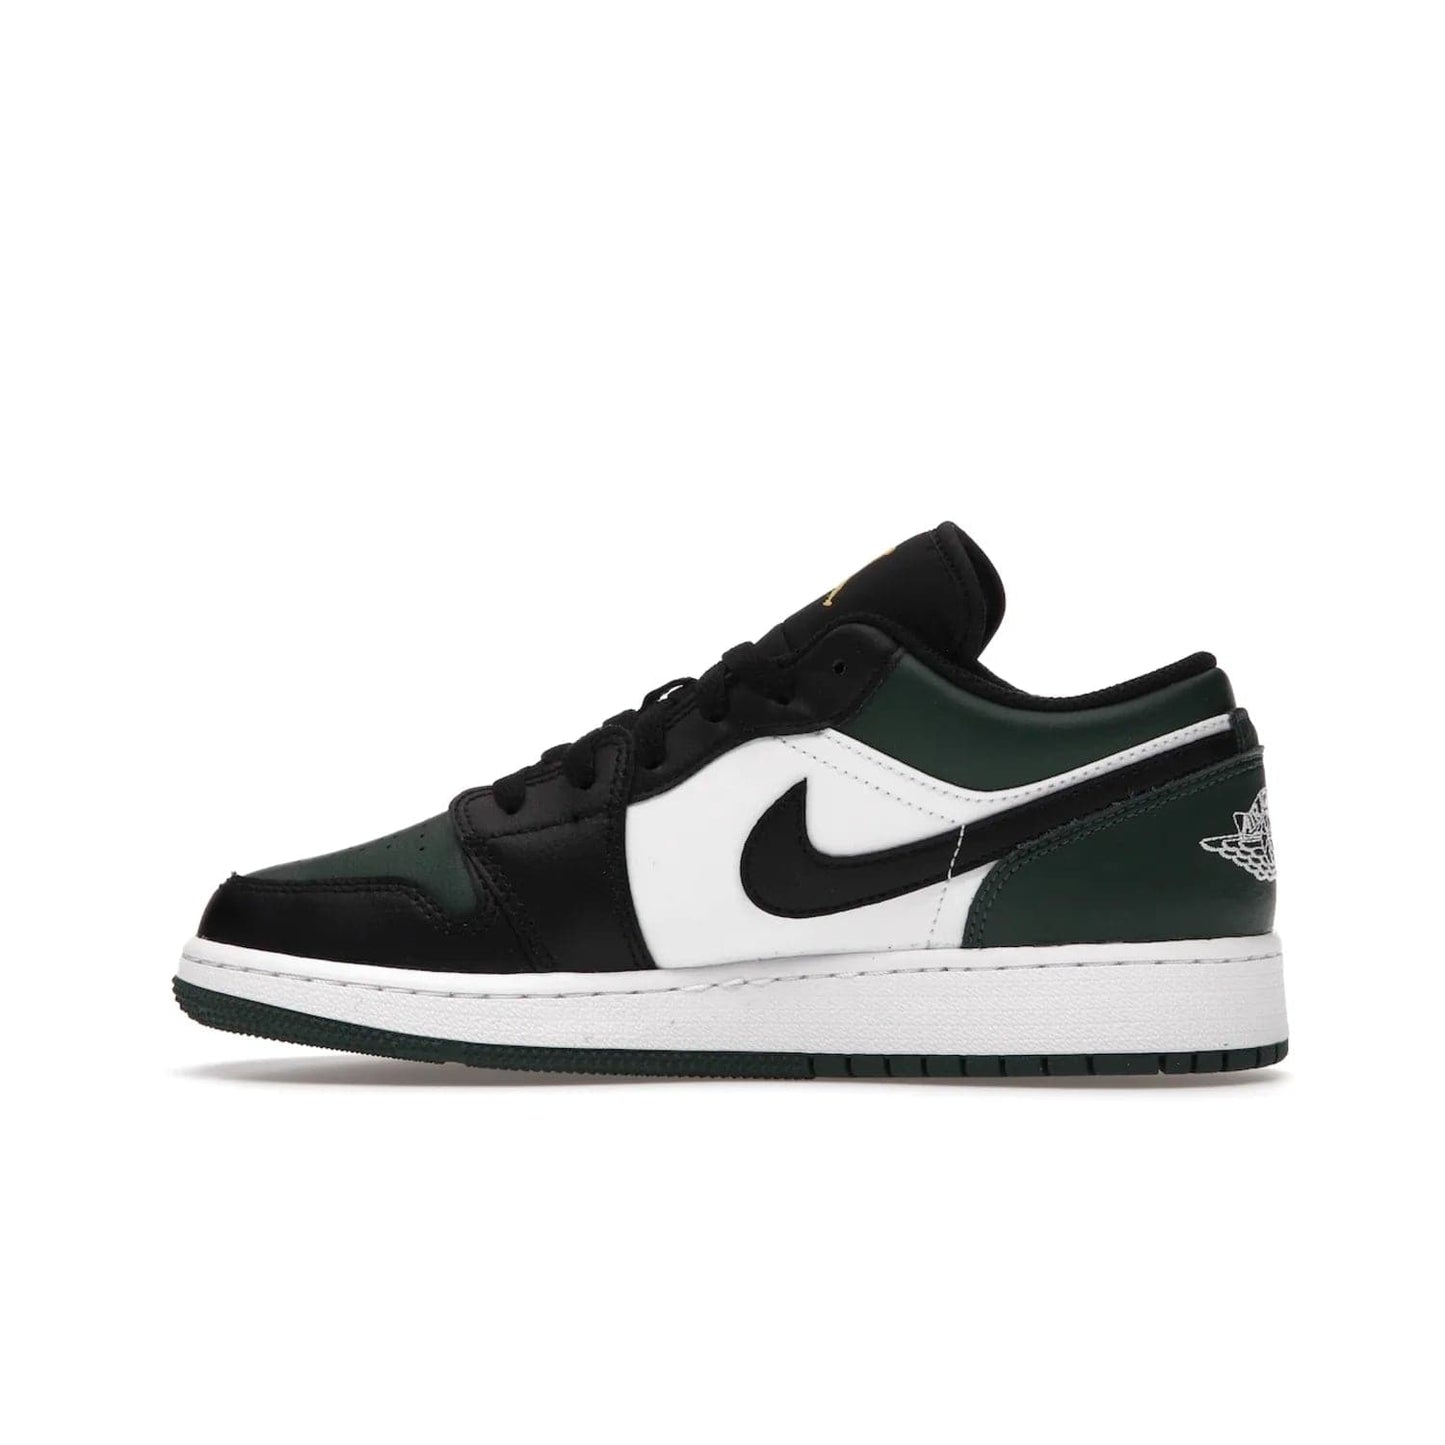 Jordan 1 Low Green Toe (GS) - Image 20 - Only at www.BallersClubKickz.com - Get the perfect low cut Jordans. Shop the Air Jordan 1 Low Noble Green GS shoes with its unique colorway and stencil Jumpman logo. Available October 2021.